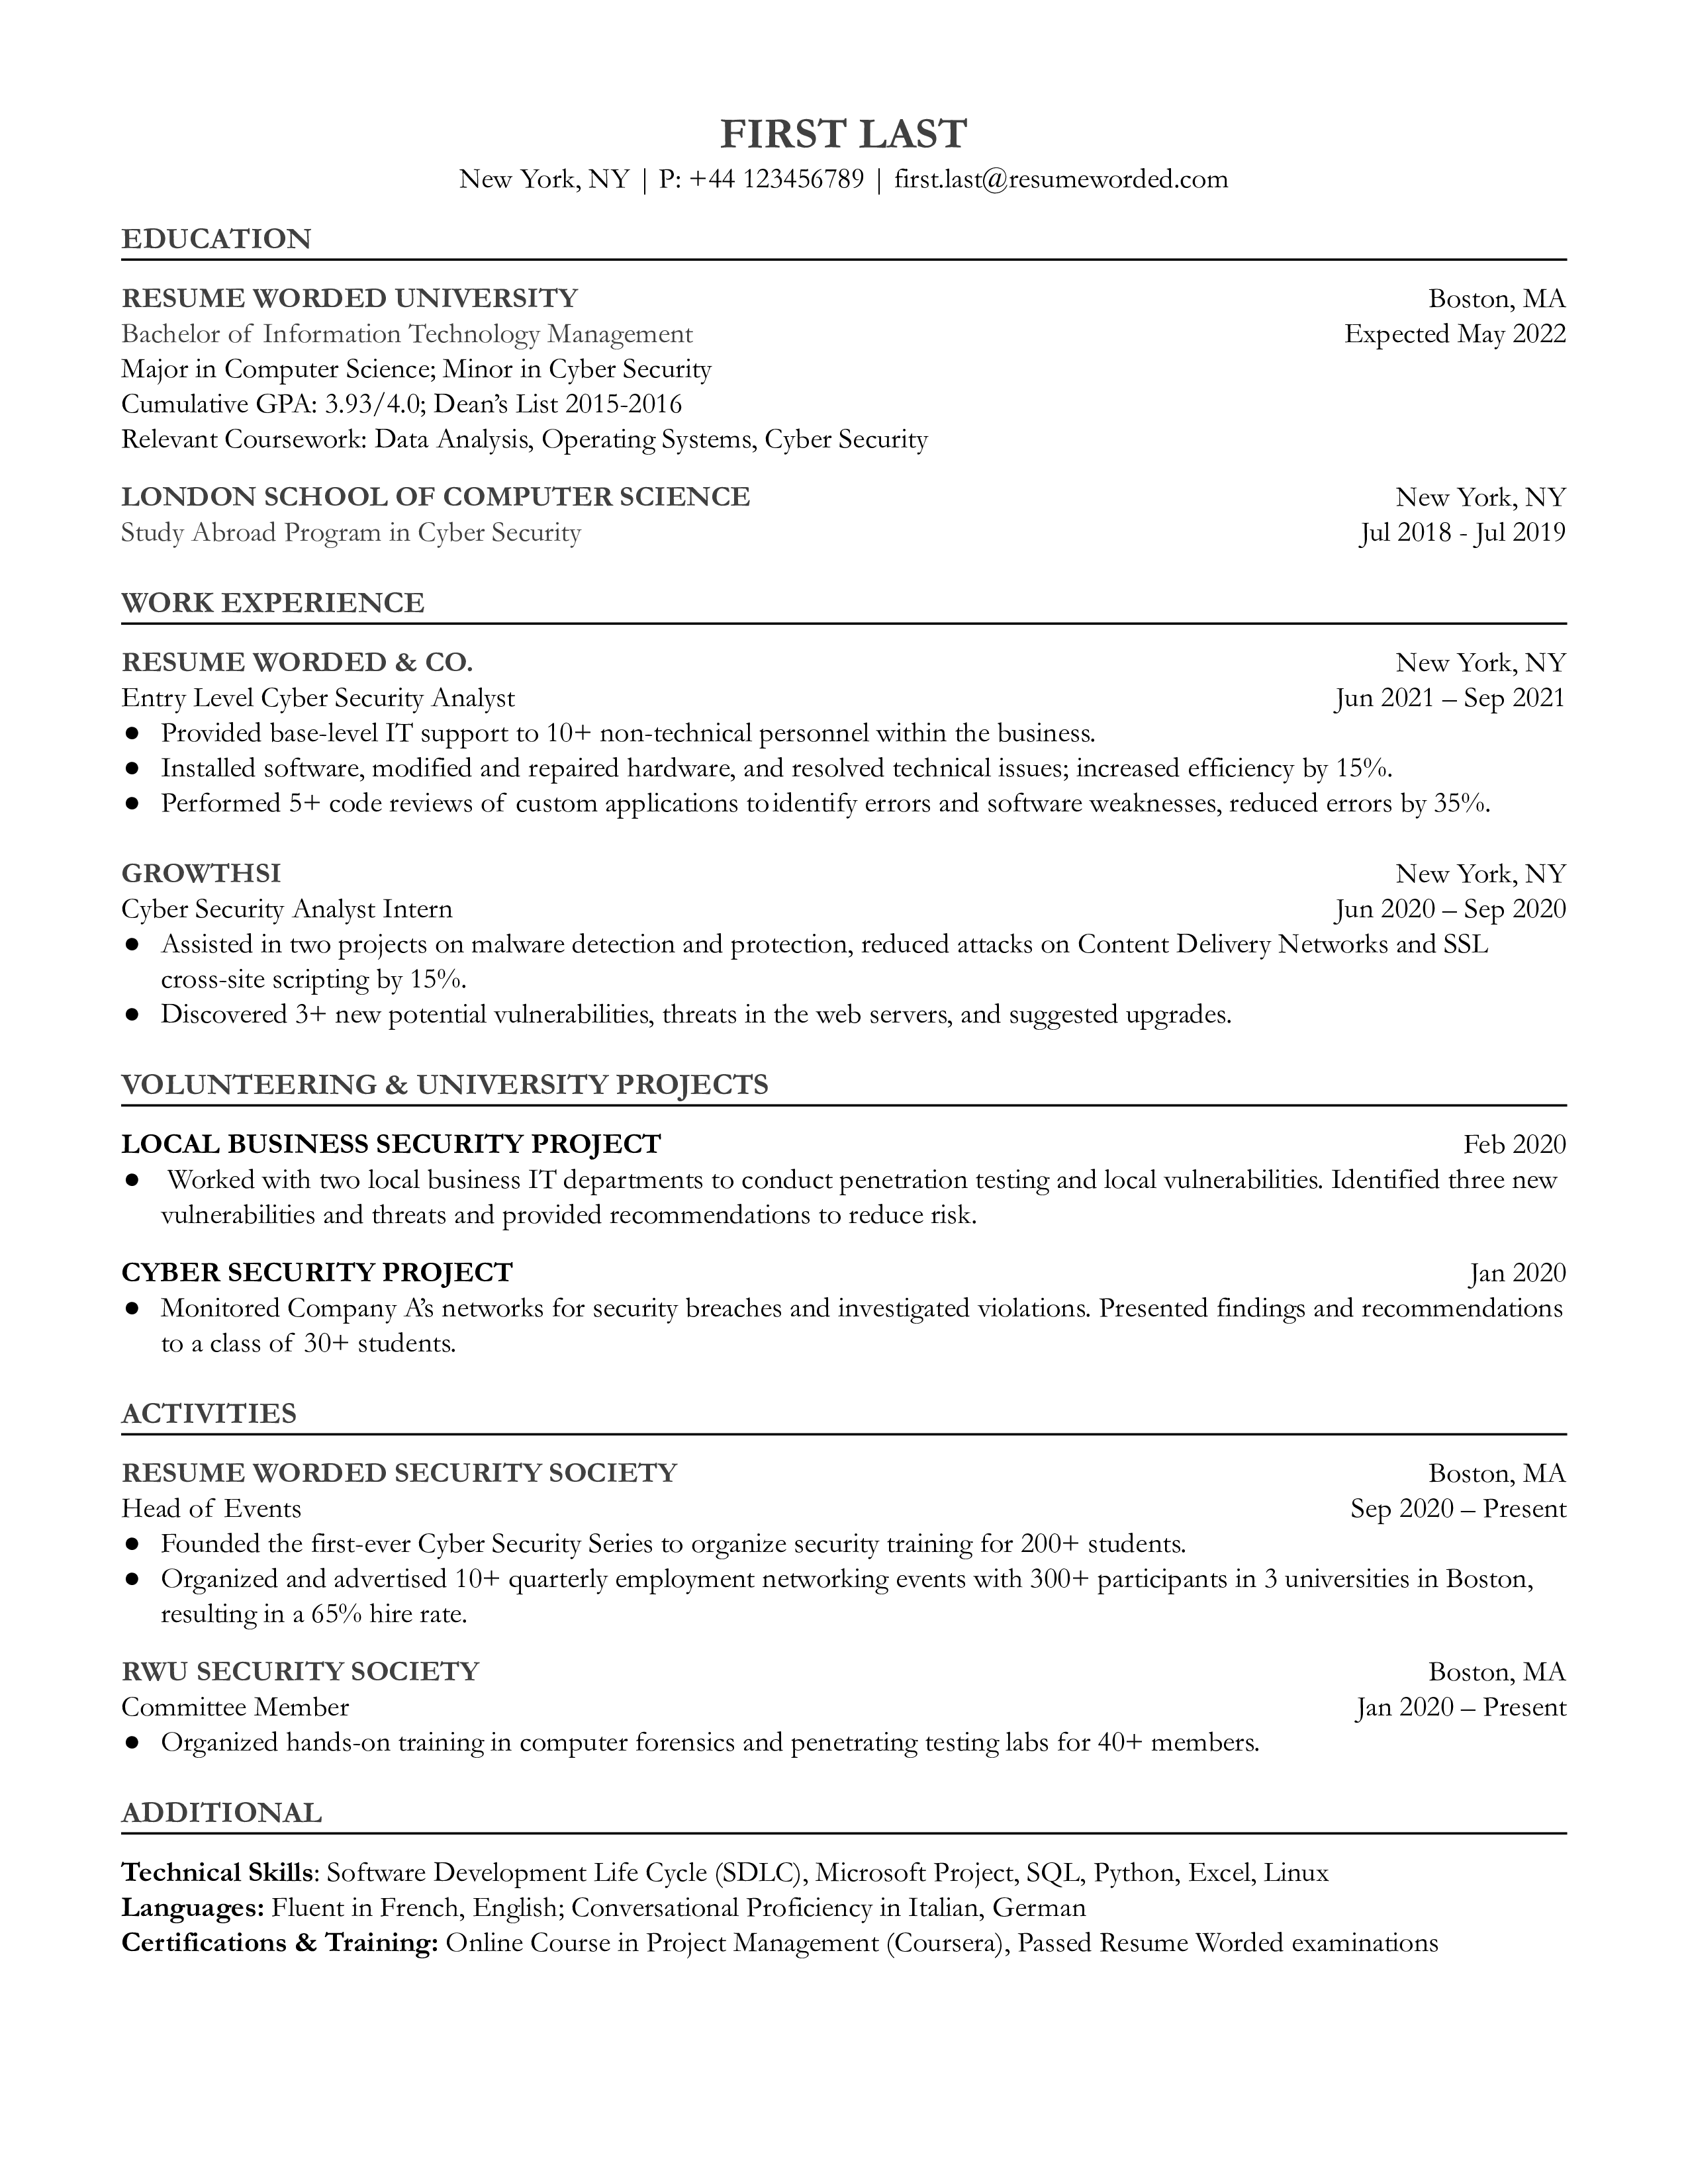 Entry level cyber security analyst resume which prioritizes education and is tailored to security roles